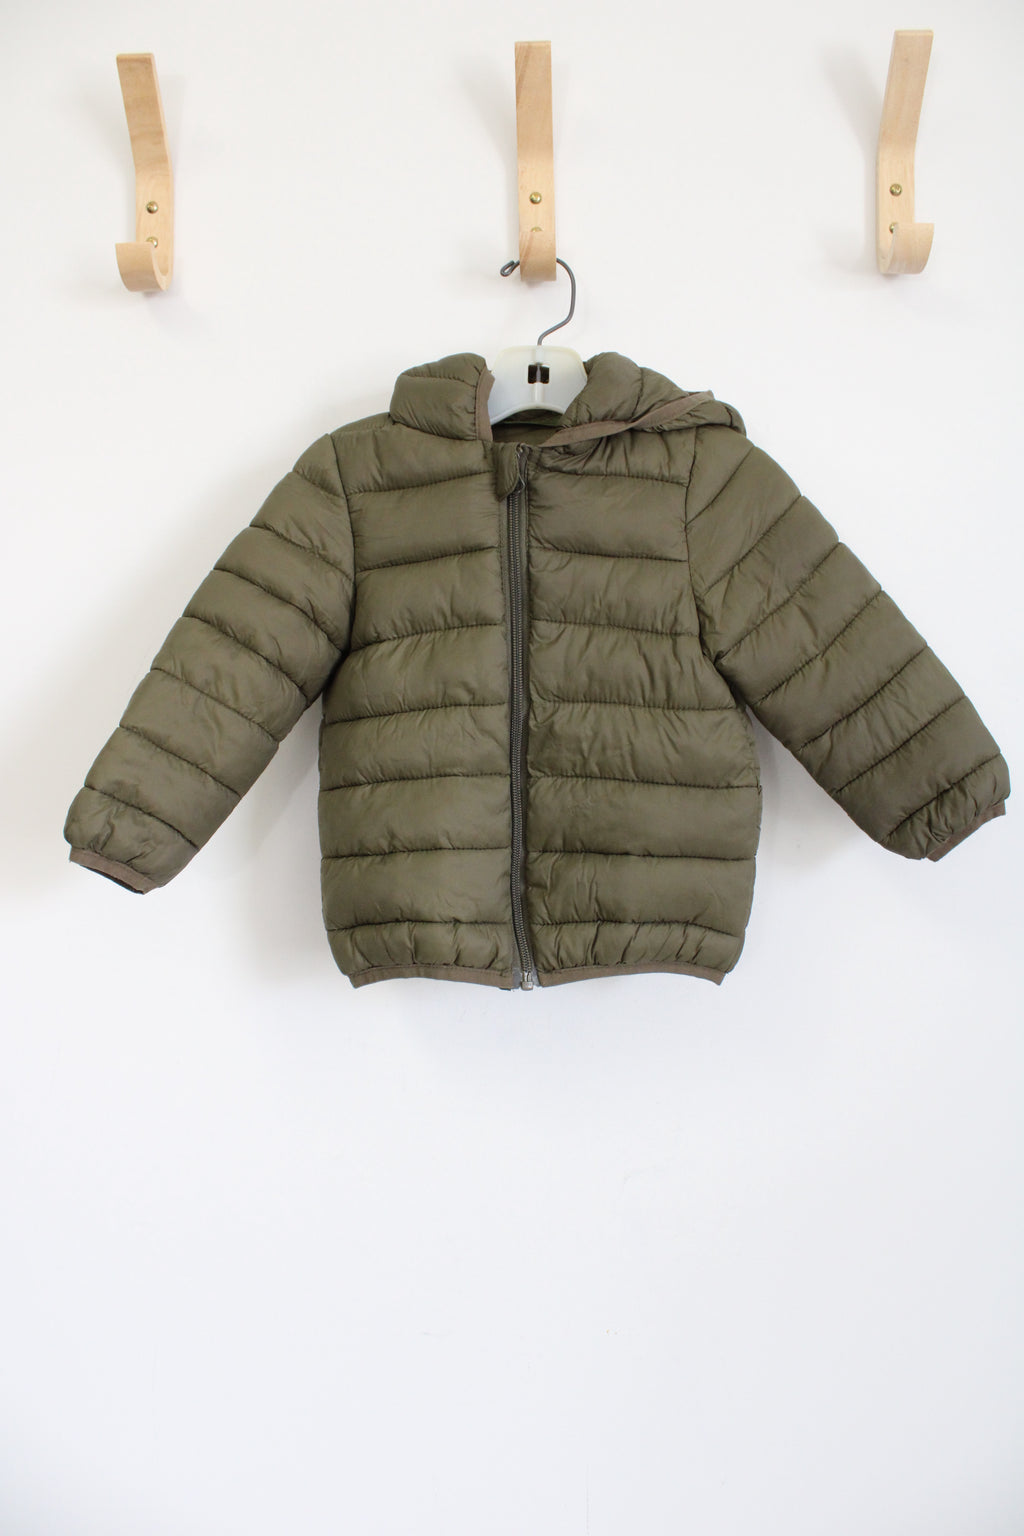 Cecorc Olive Green Puffer Winter Coat | 12-18 MO